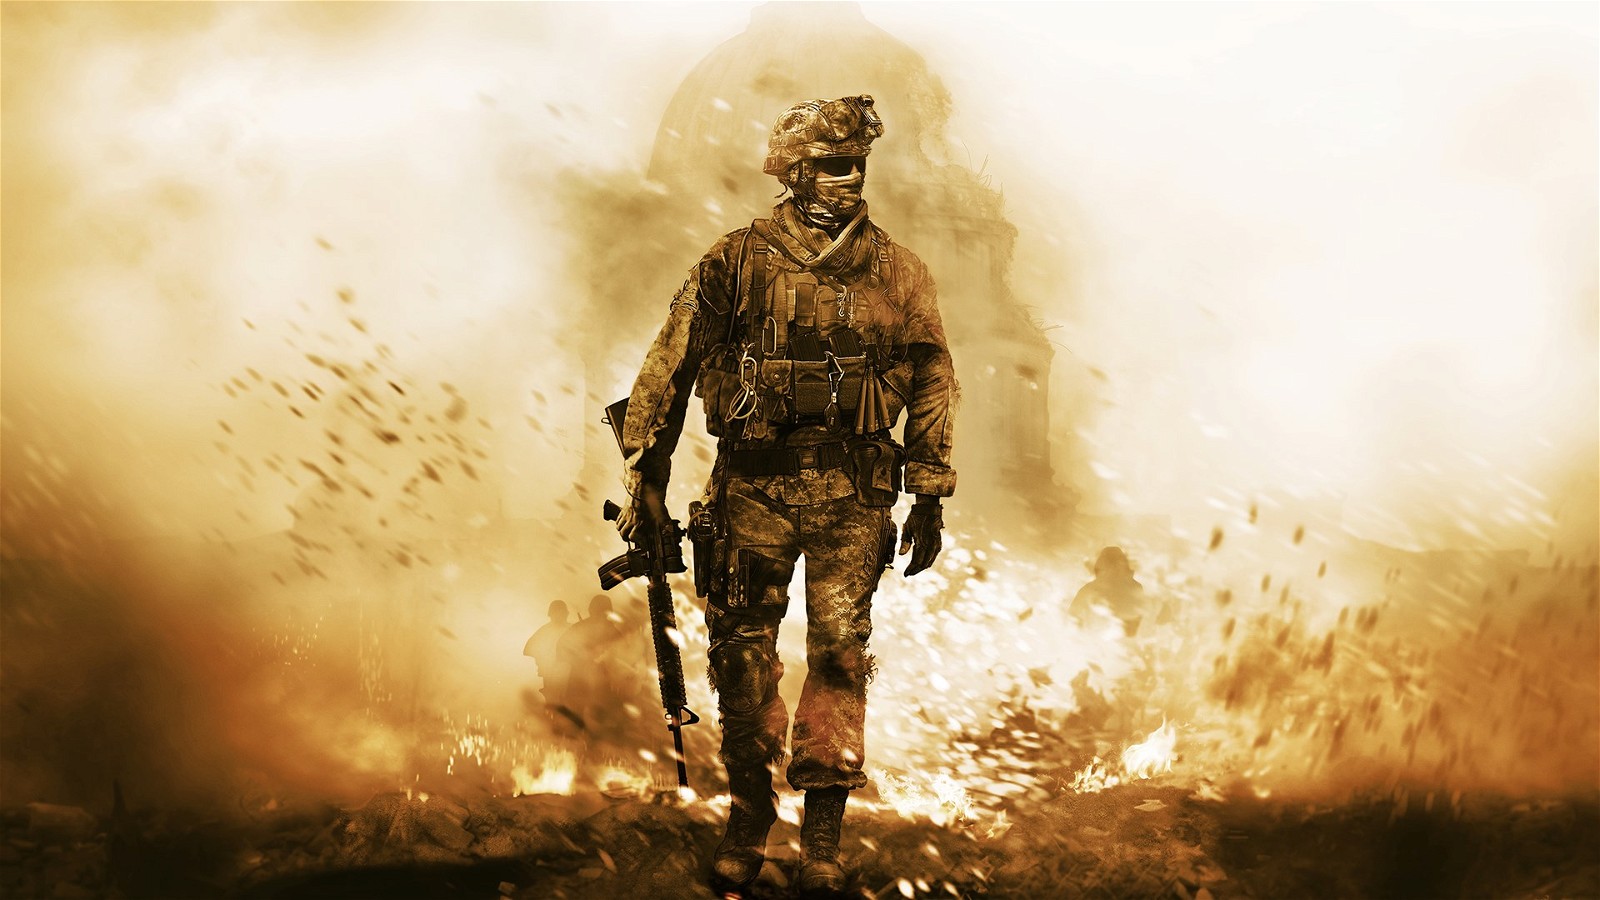 The poster of Call of Duty: Modern Warfare 2 (2009)